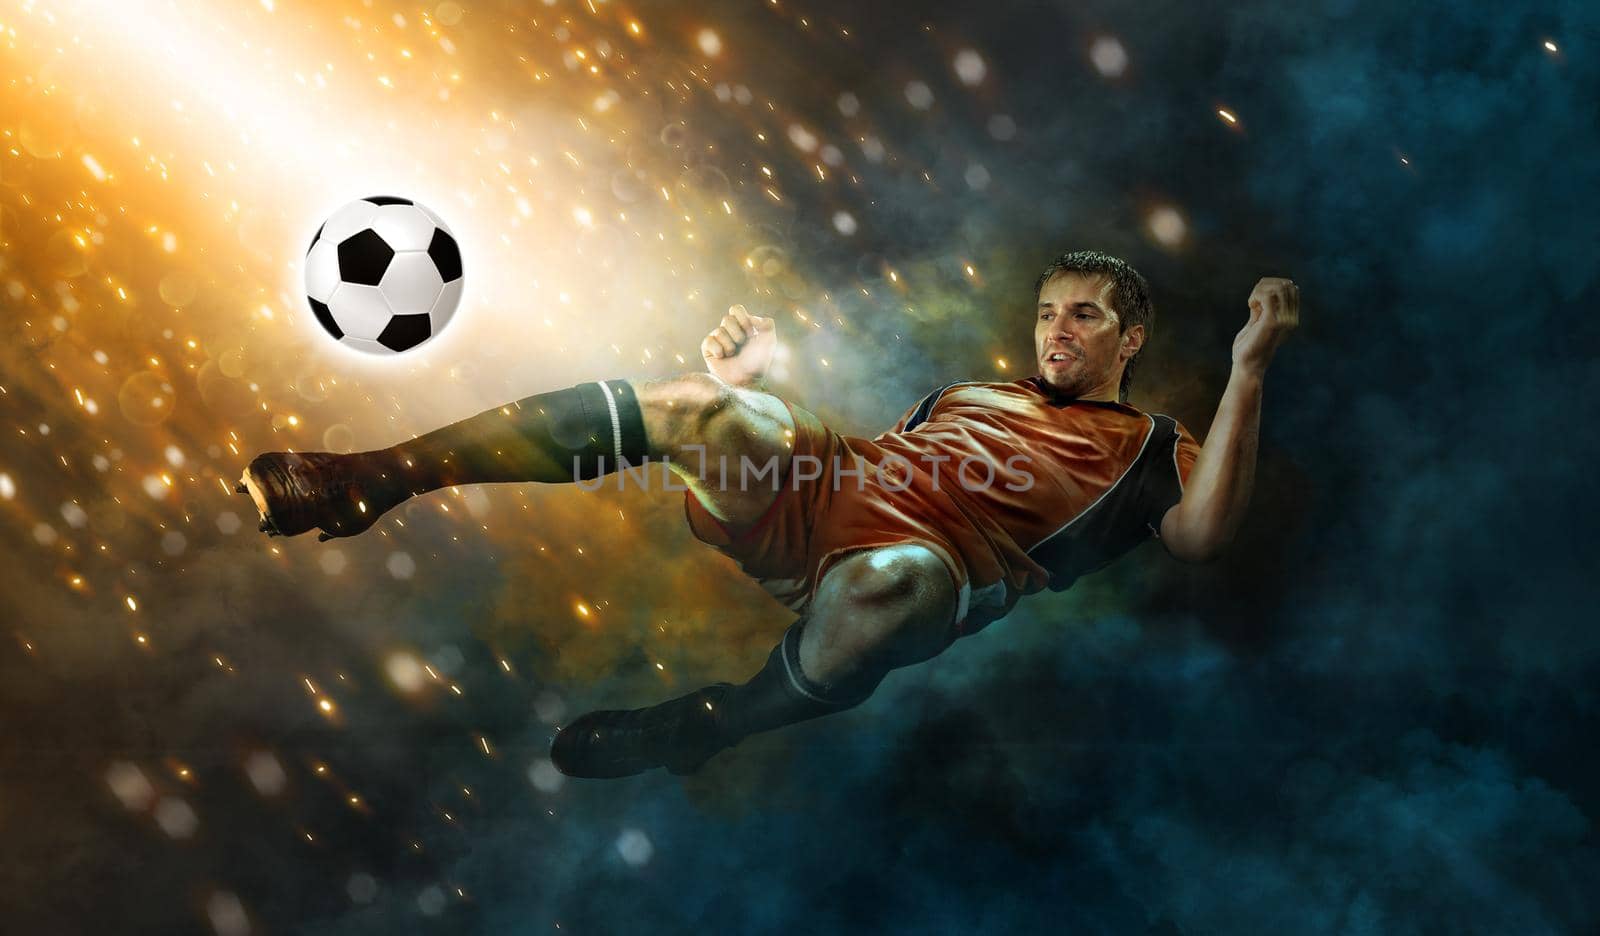 Football or soccer player in action on stadium with flashlights, kicking ball for winning goal. Concept of sport, competition, motion